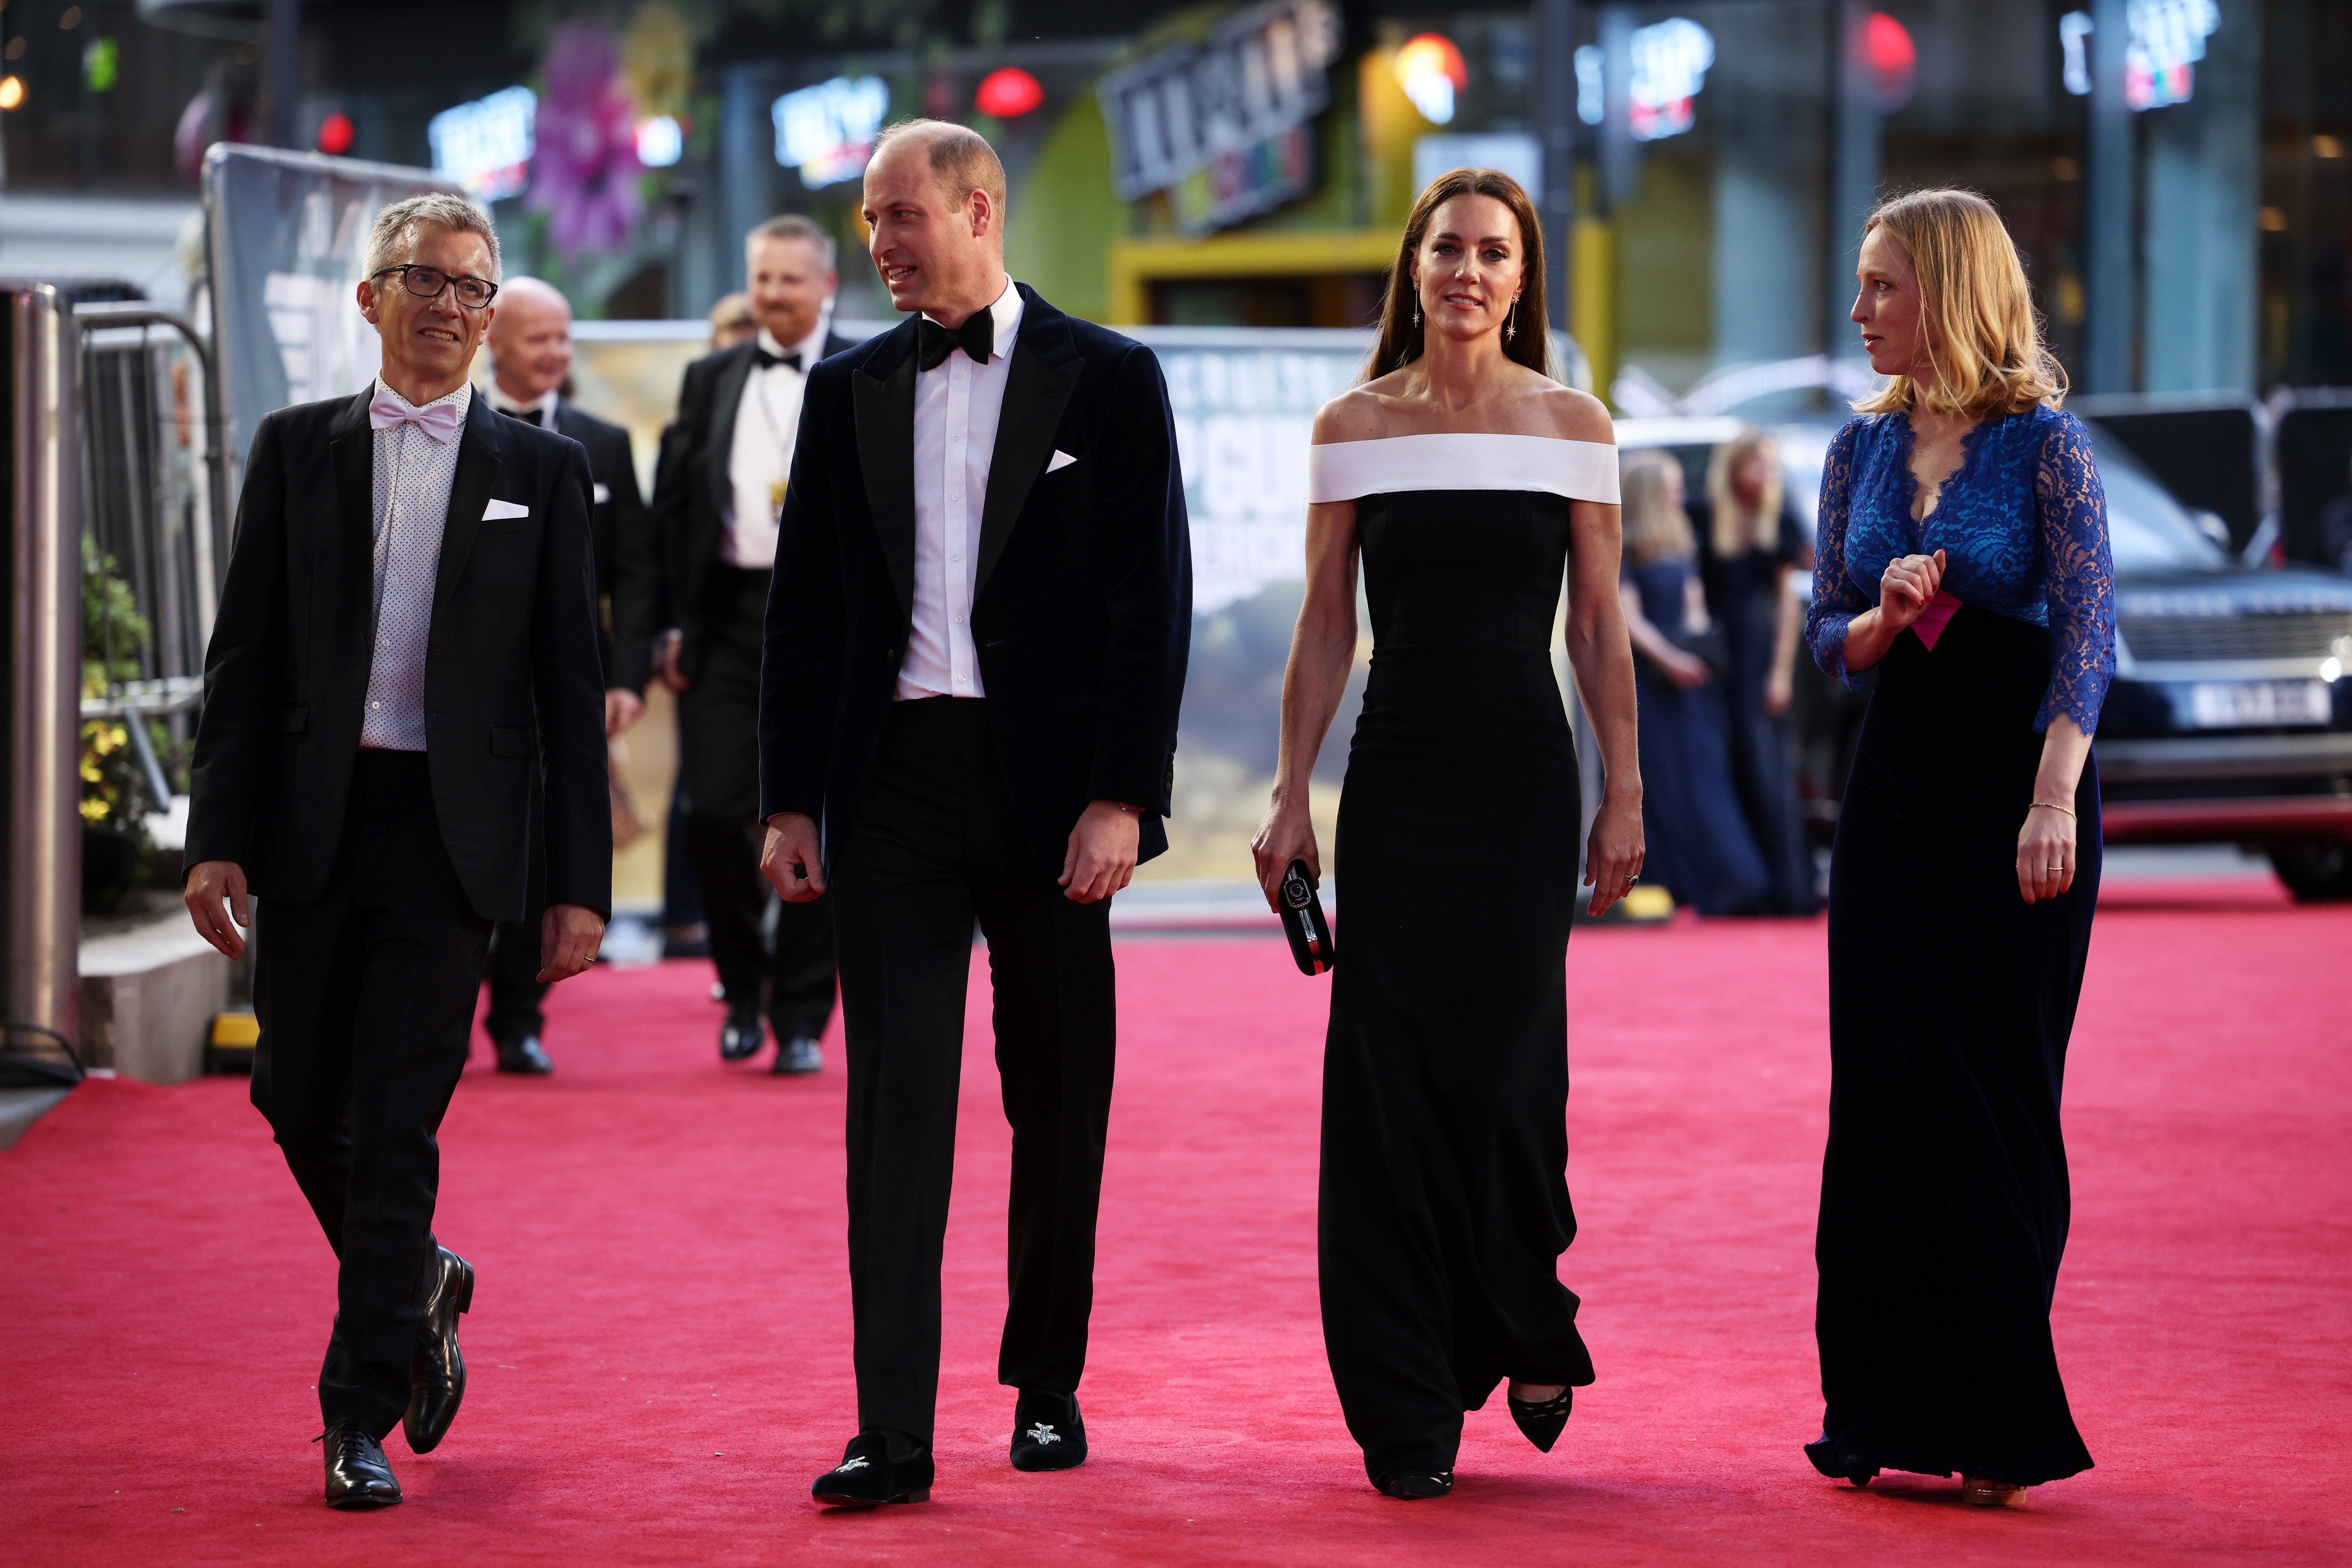 LONDON, ENGLAND - MAY 19: Prince William, Duke of Cambridge and Catherine, Duchess of Cambridge (C) arrive with Cameron Saunders (L) and Alex Pumfrey (R) of the Film and TV Charity for the "Top Gun: Maverick" Royal Film Performance at Leicester Square on  (Foto: Getty Images)